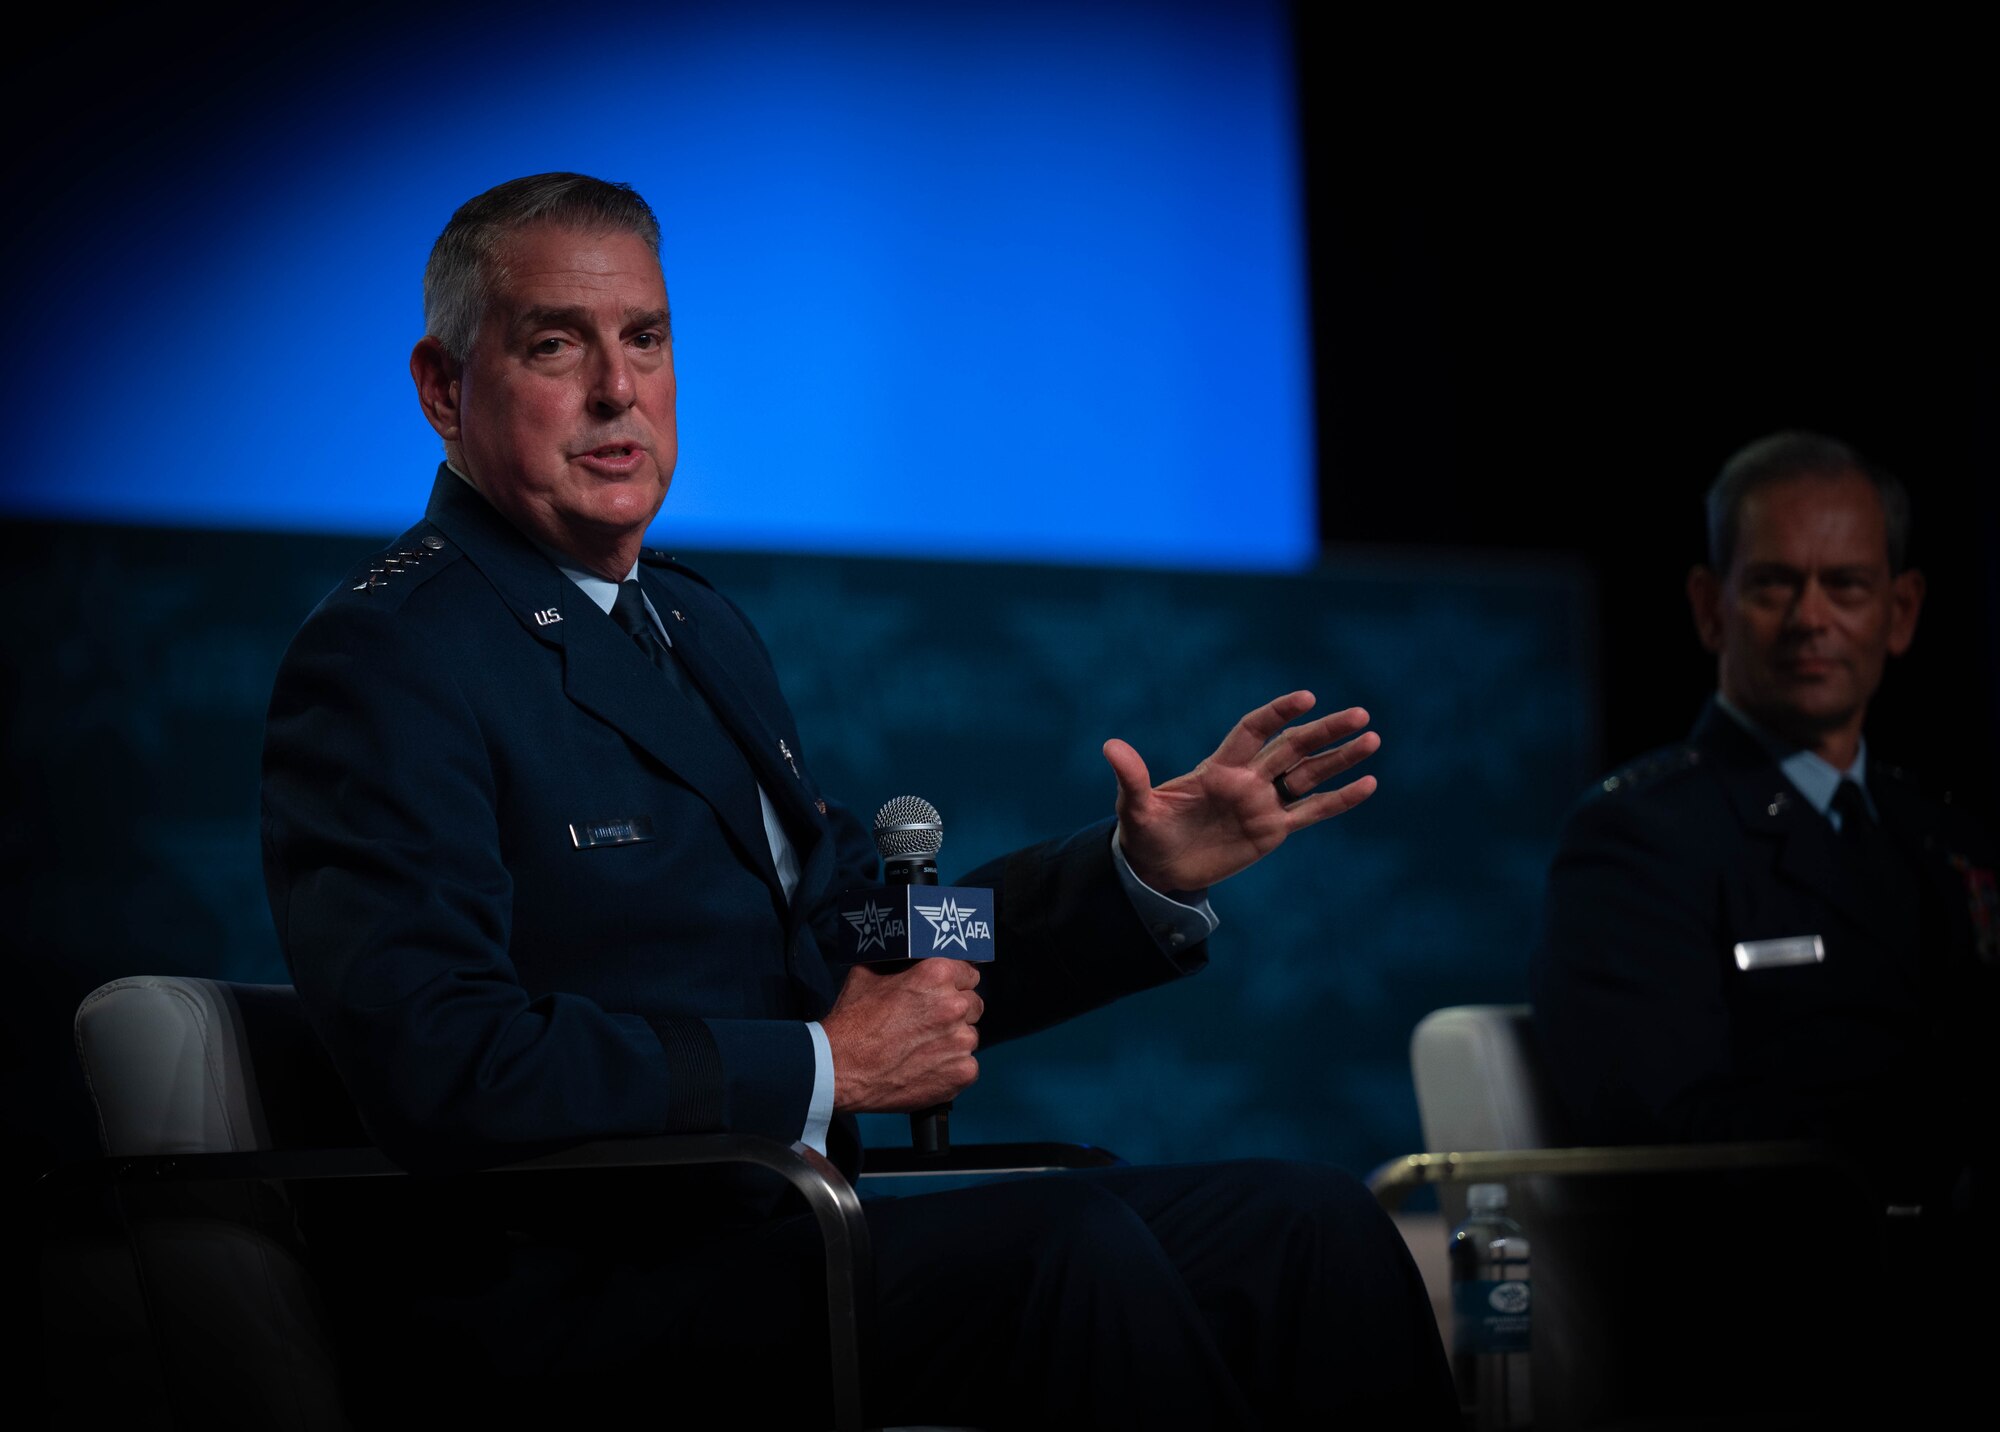 Gen. Mike Minihan, Commander, Air Mobility Command spoke on a panel titled "Ready to Compete, Fight and Win in the Indo-Pacific" during the Air and Space Force Association Conference, Sept. 13, 2023. Gen. Kenneth Wilsbach, Commander, Pacific Air Forces and Gen. Tony Bauernfeind, Commander, Air Force Special Operations Command, also participated in the discussion. (U.S. Air Force photo by Rachel Sansano)